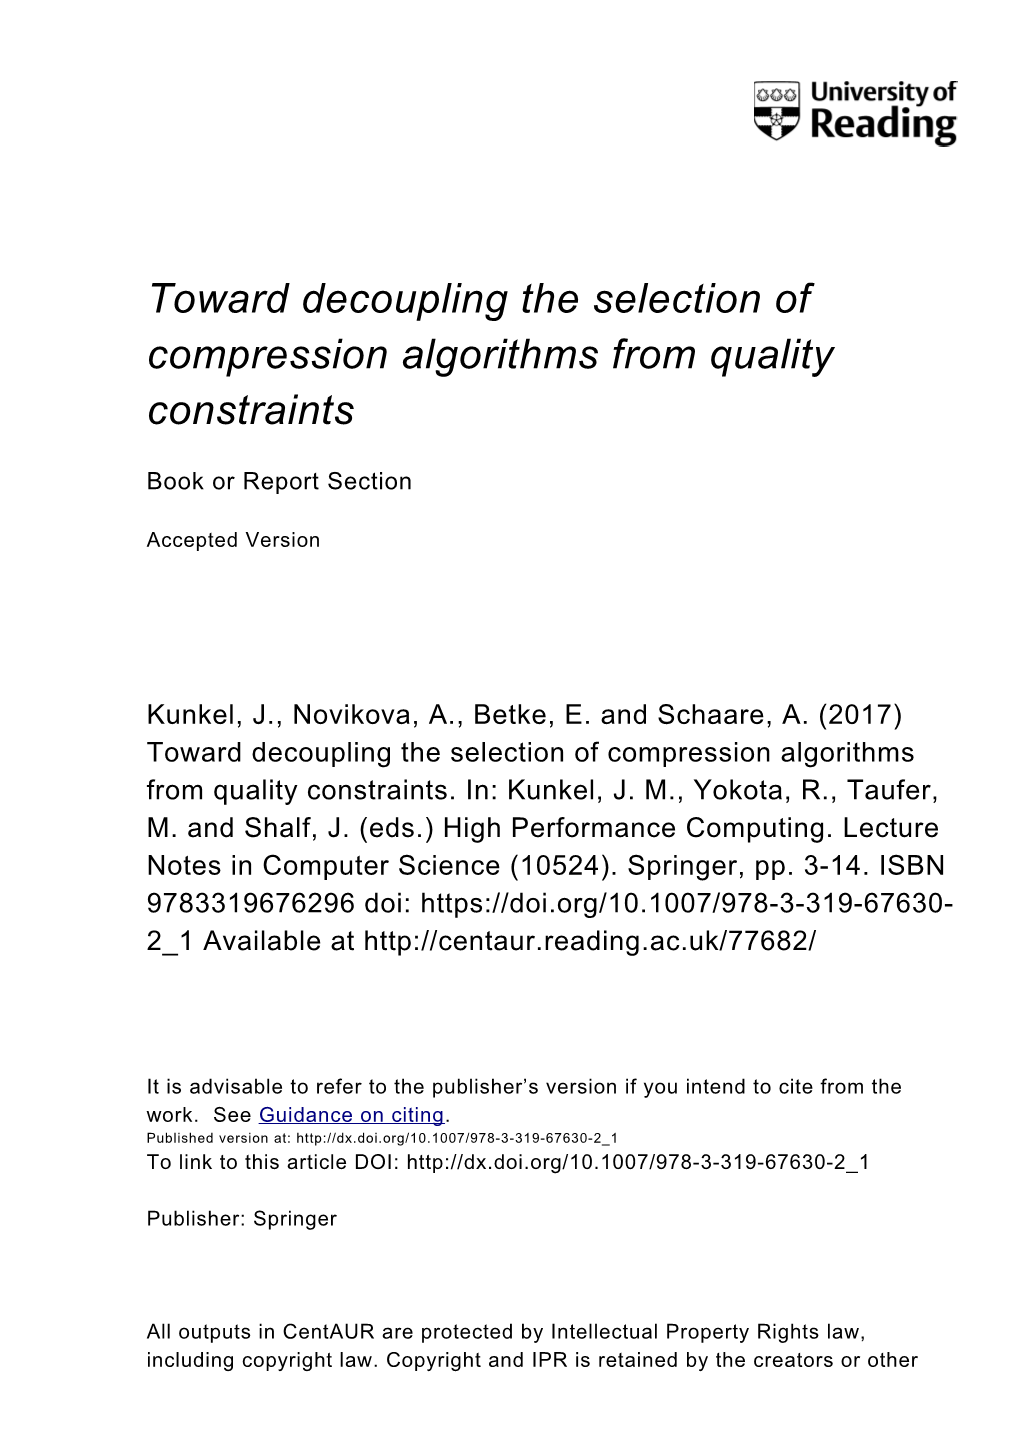 Toward Decoupling the Selection of Compression Algorithms from Quality Constraints